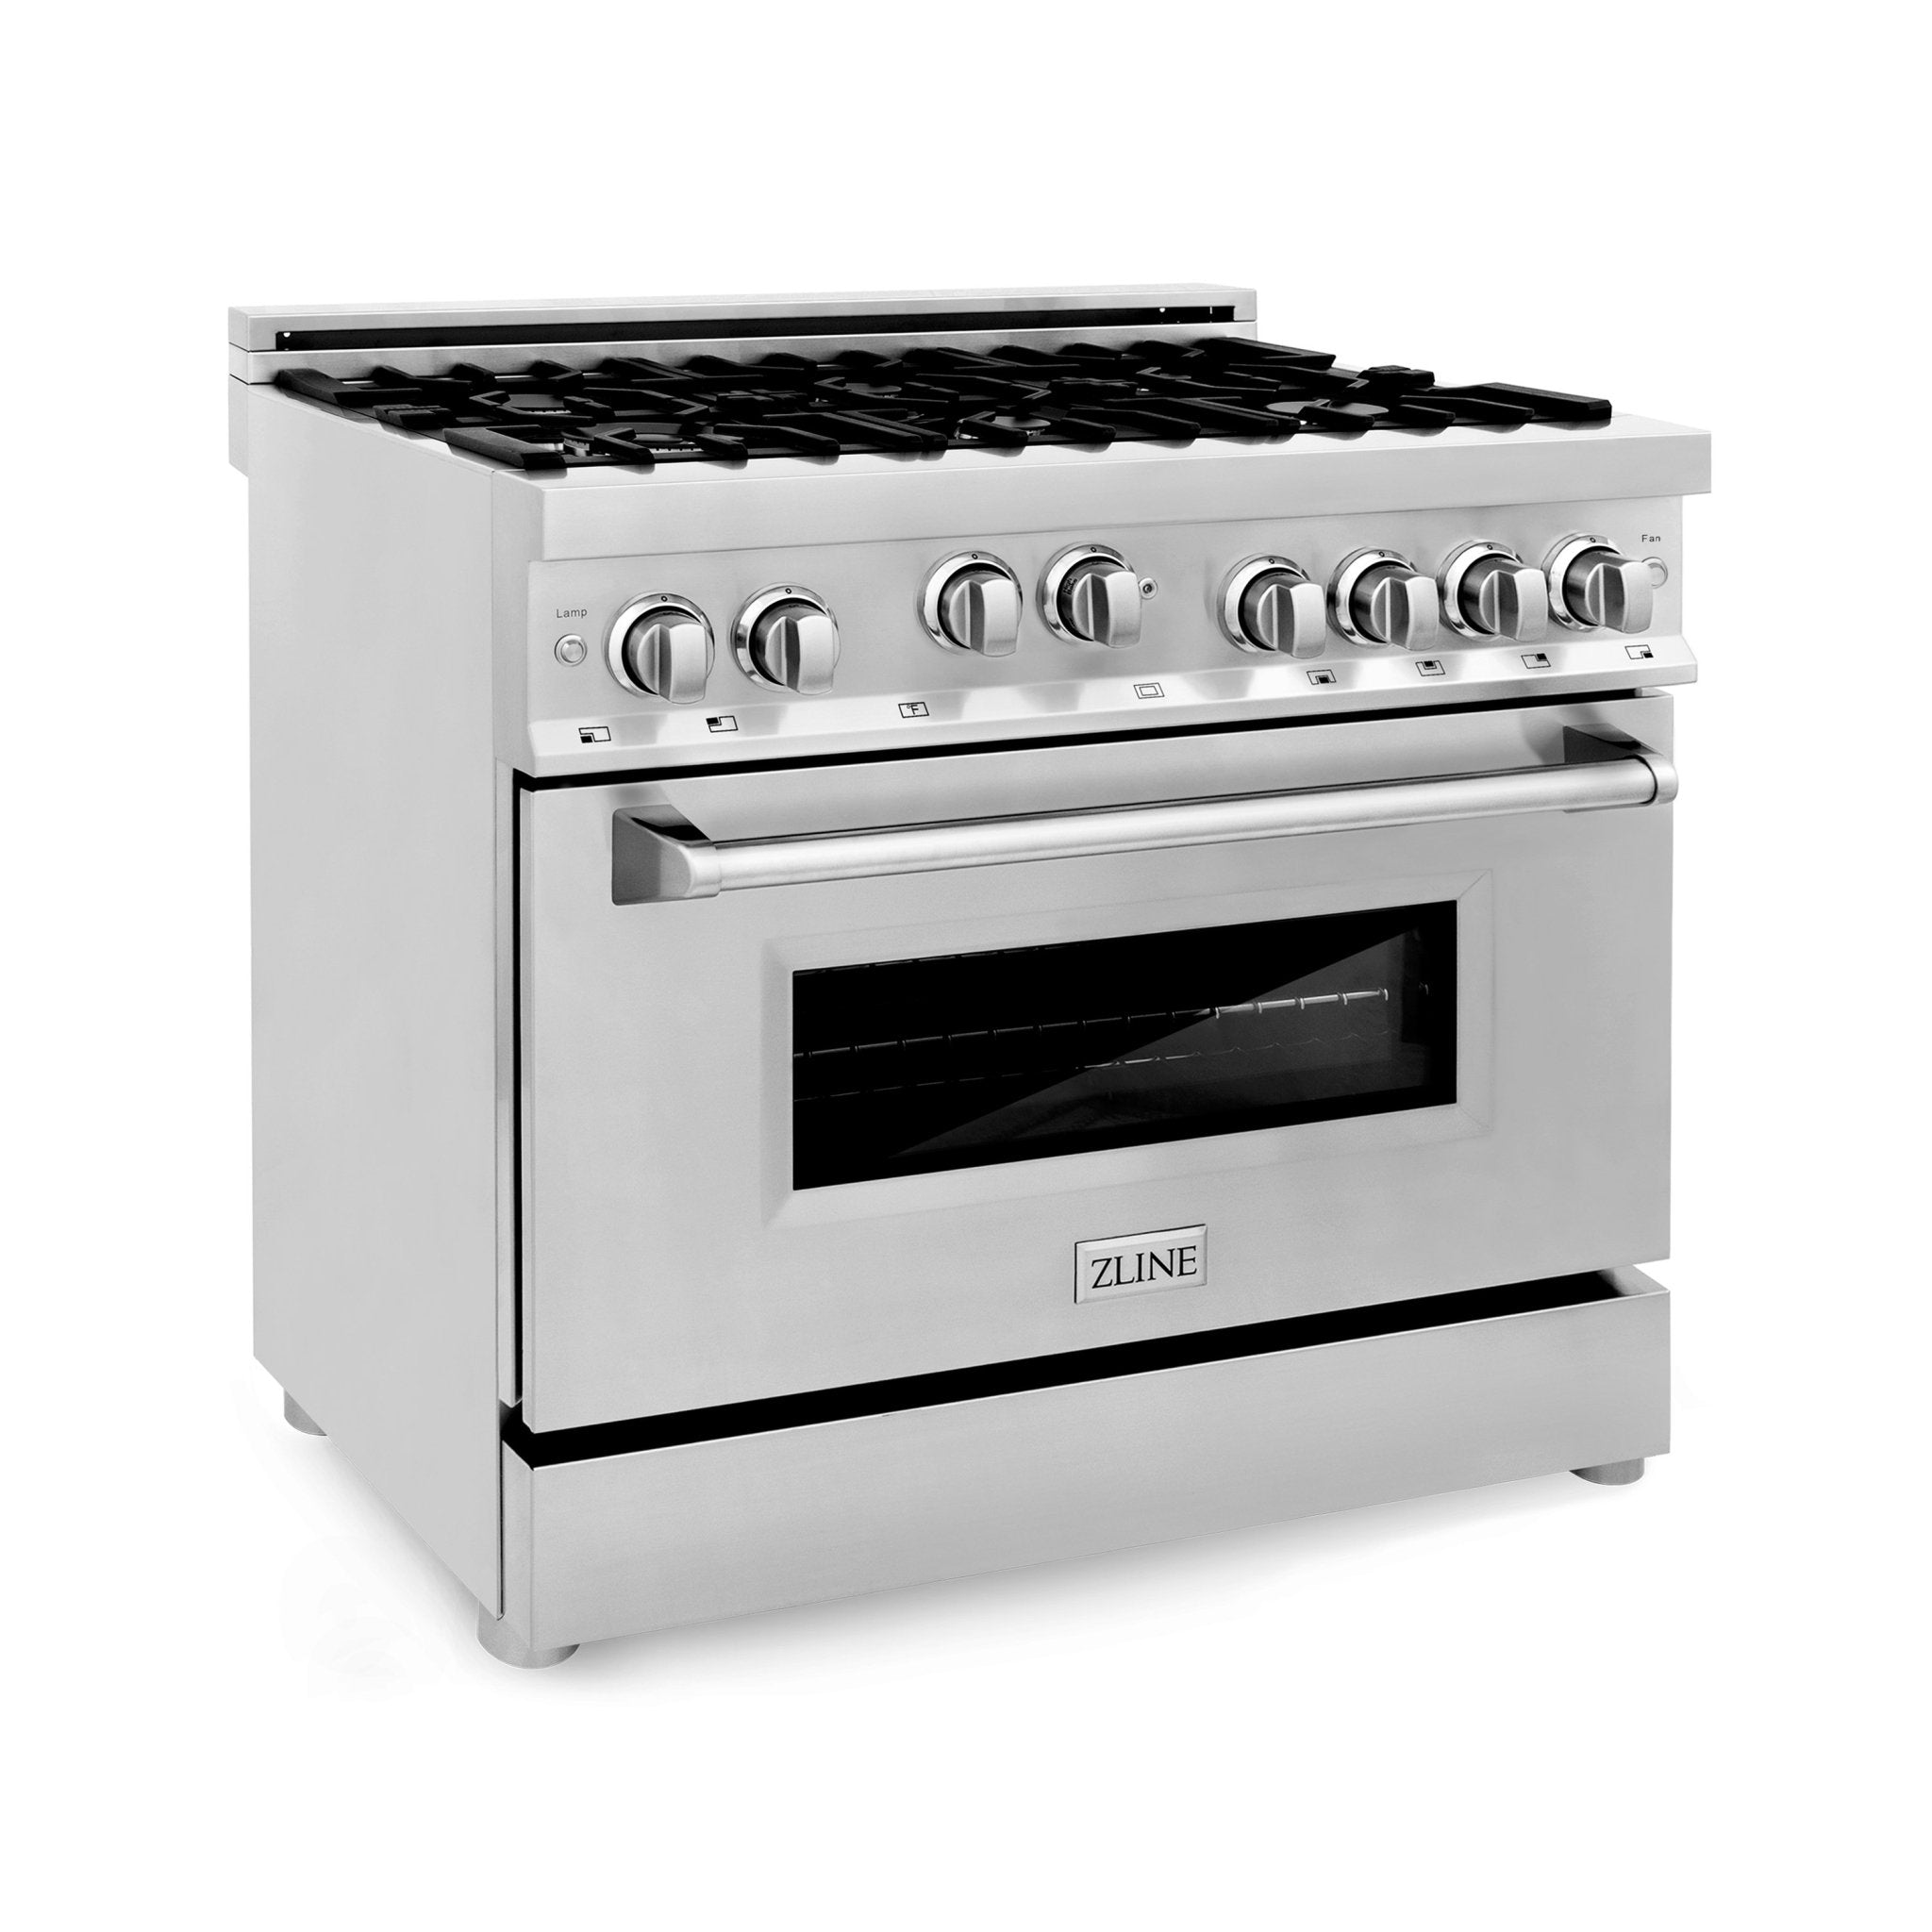 ZLINE 36" Professional 4.6 cu. ft. 6 Gas on Gas Range in Stainless Steel with Color Door Options - Rustic Kitchen & Bath - Ranges - ZLINE Kitchen and Bath